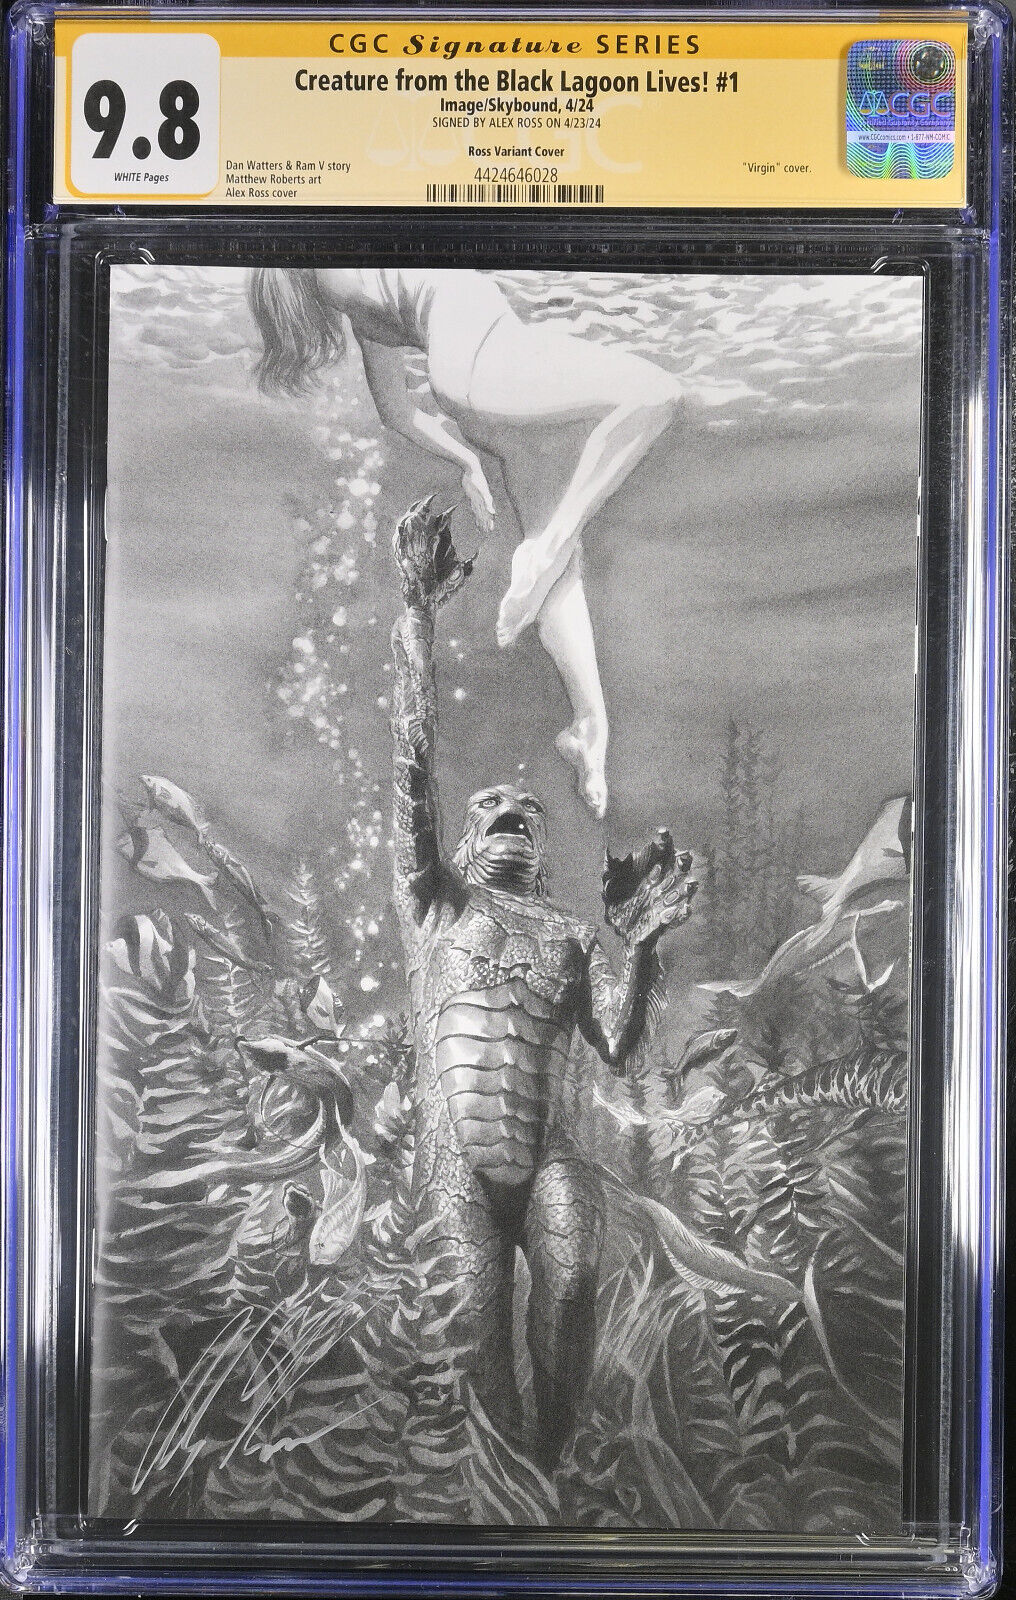 CREATURE FROM THE BLACK LAGOON LIVES #1 CGC 9.8 SIGNATURE SERIES  ALEX ROSS